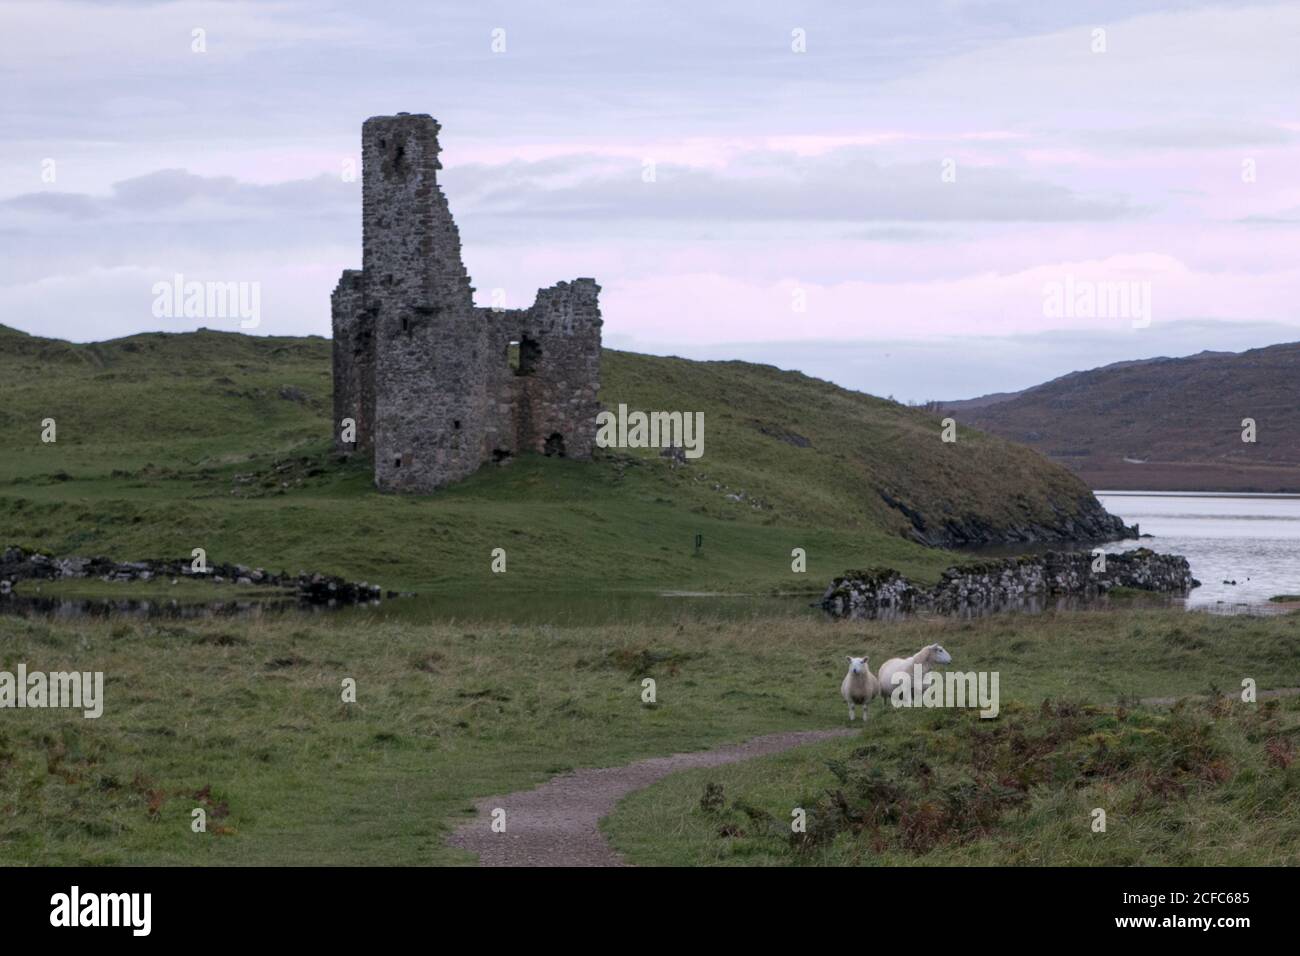 Castle ruins and landscape with sheep in Scotland's Highlands Stock Photo